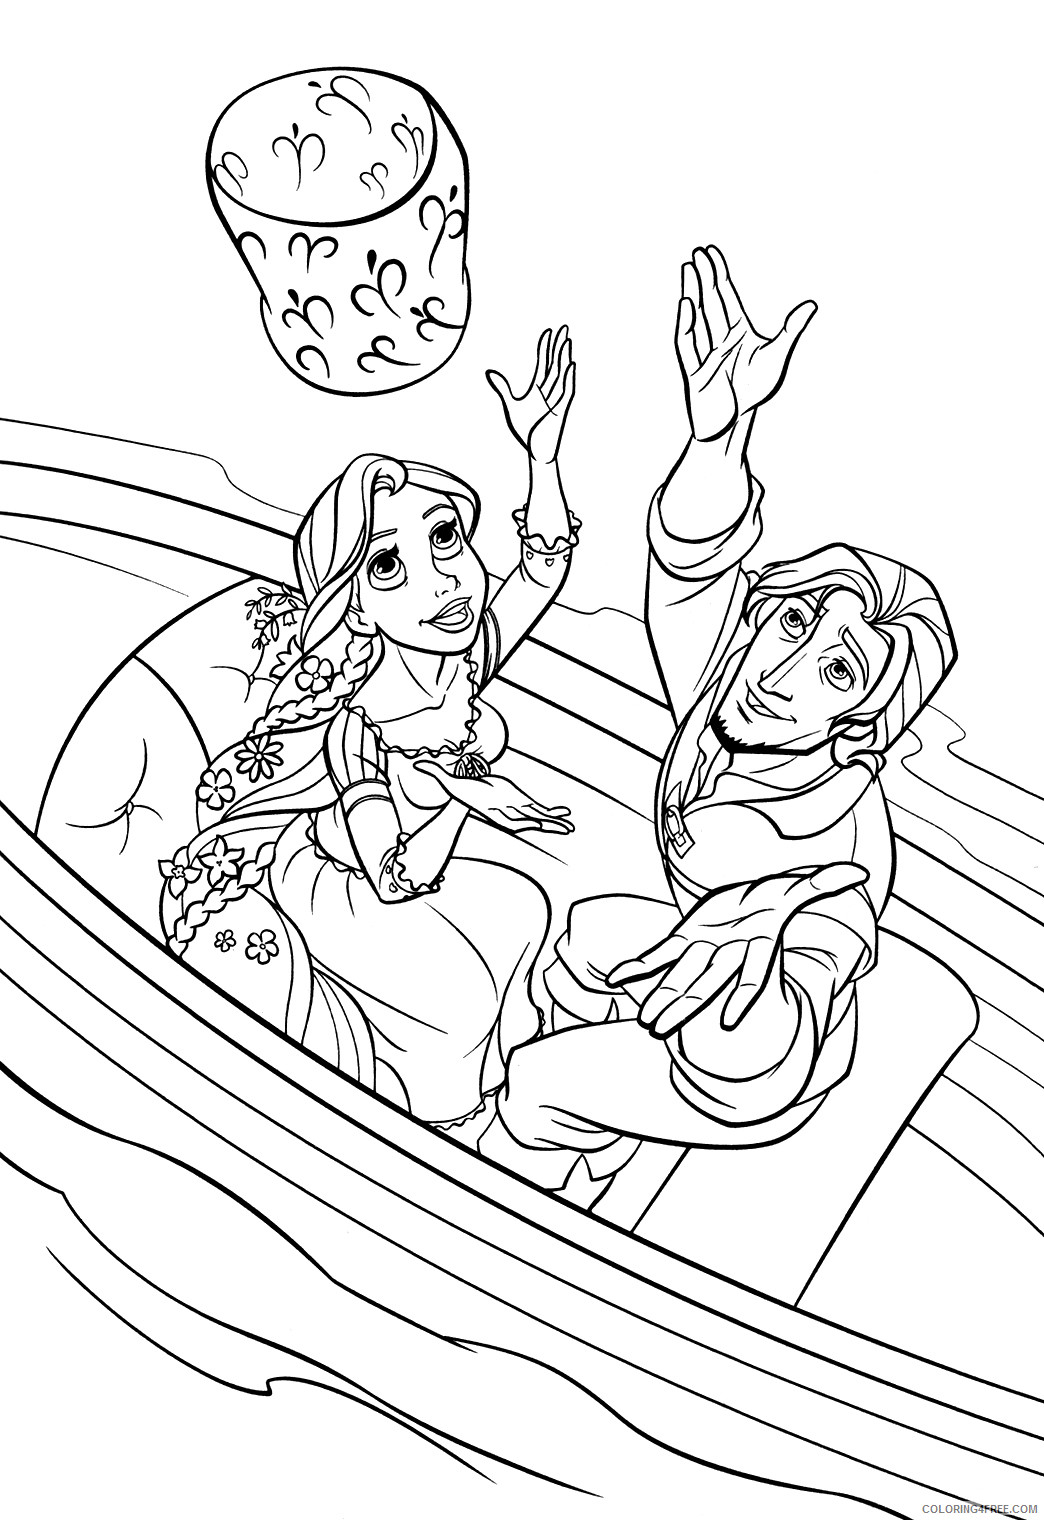 Rapunzel Coloring Pages Cartoons Tangled Rapunzel Free Printable 2020 5349 Coloring4free